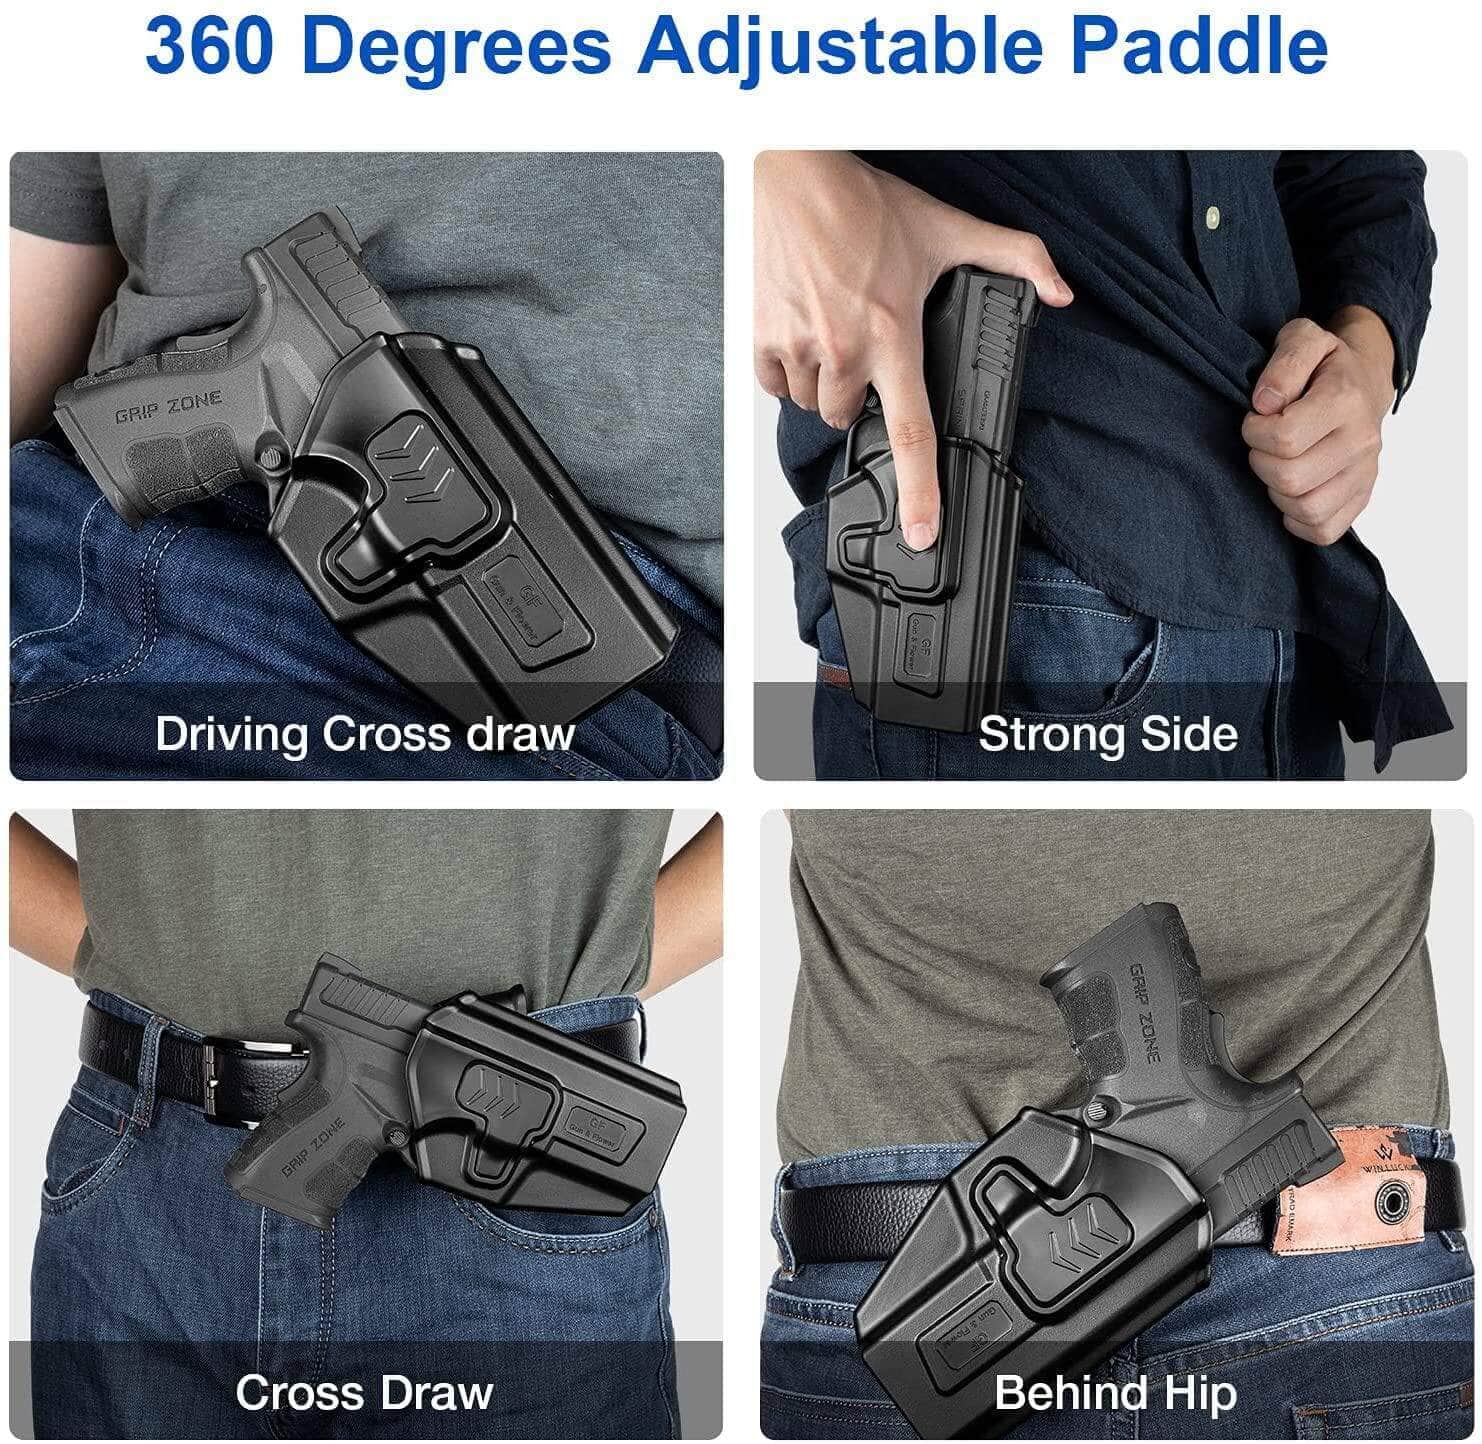  G22 Gen 5 Holster, OWB Holster for Glock 22 Gen5 - Adjustable  Tension & Cant, Index Finger Released, Autolock, Outside Waistband Carry, Silicone Pad Paddle